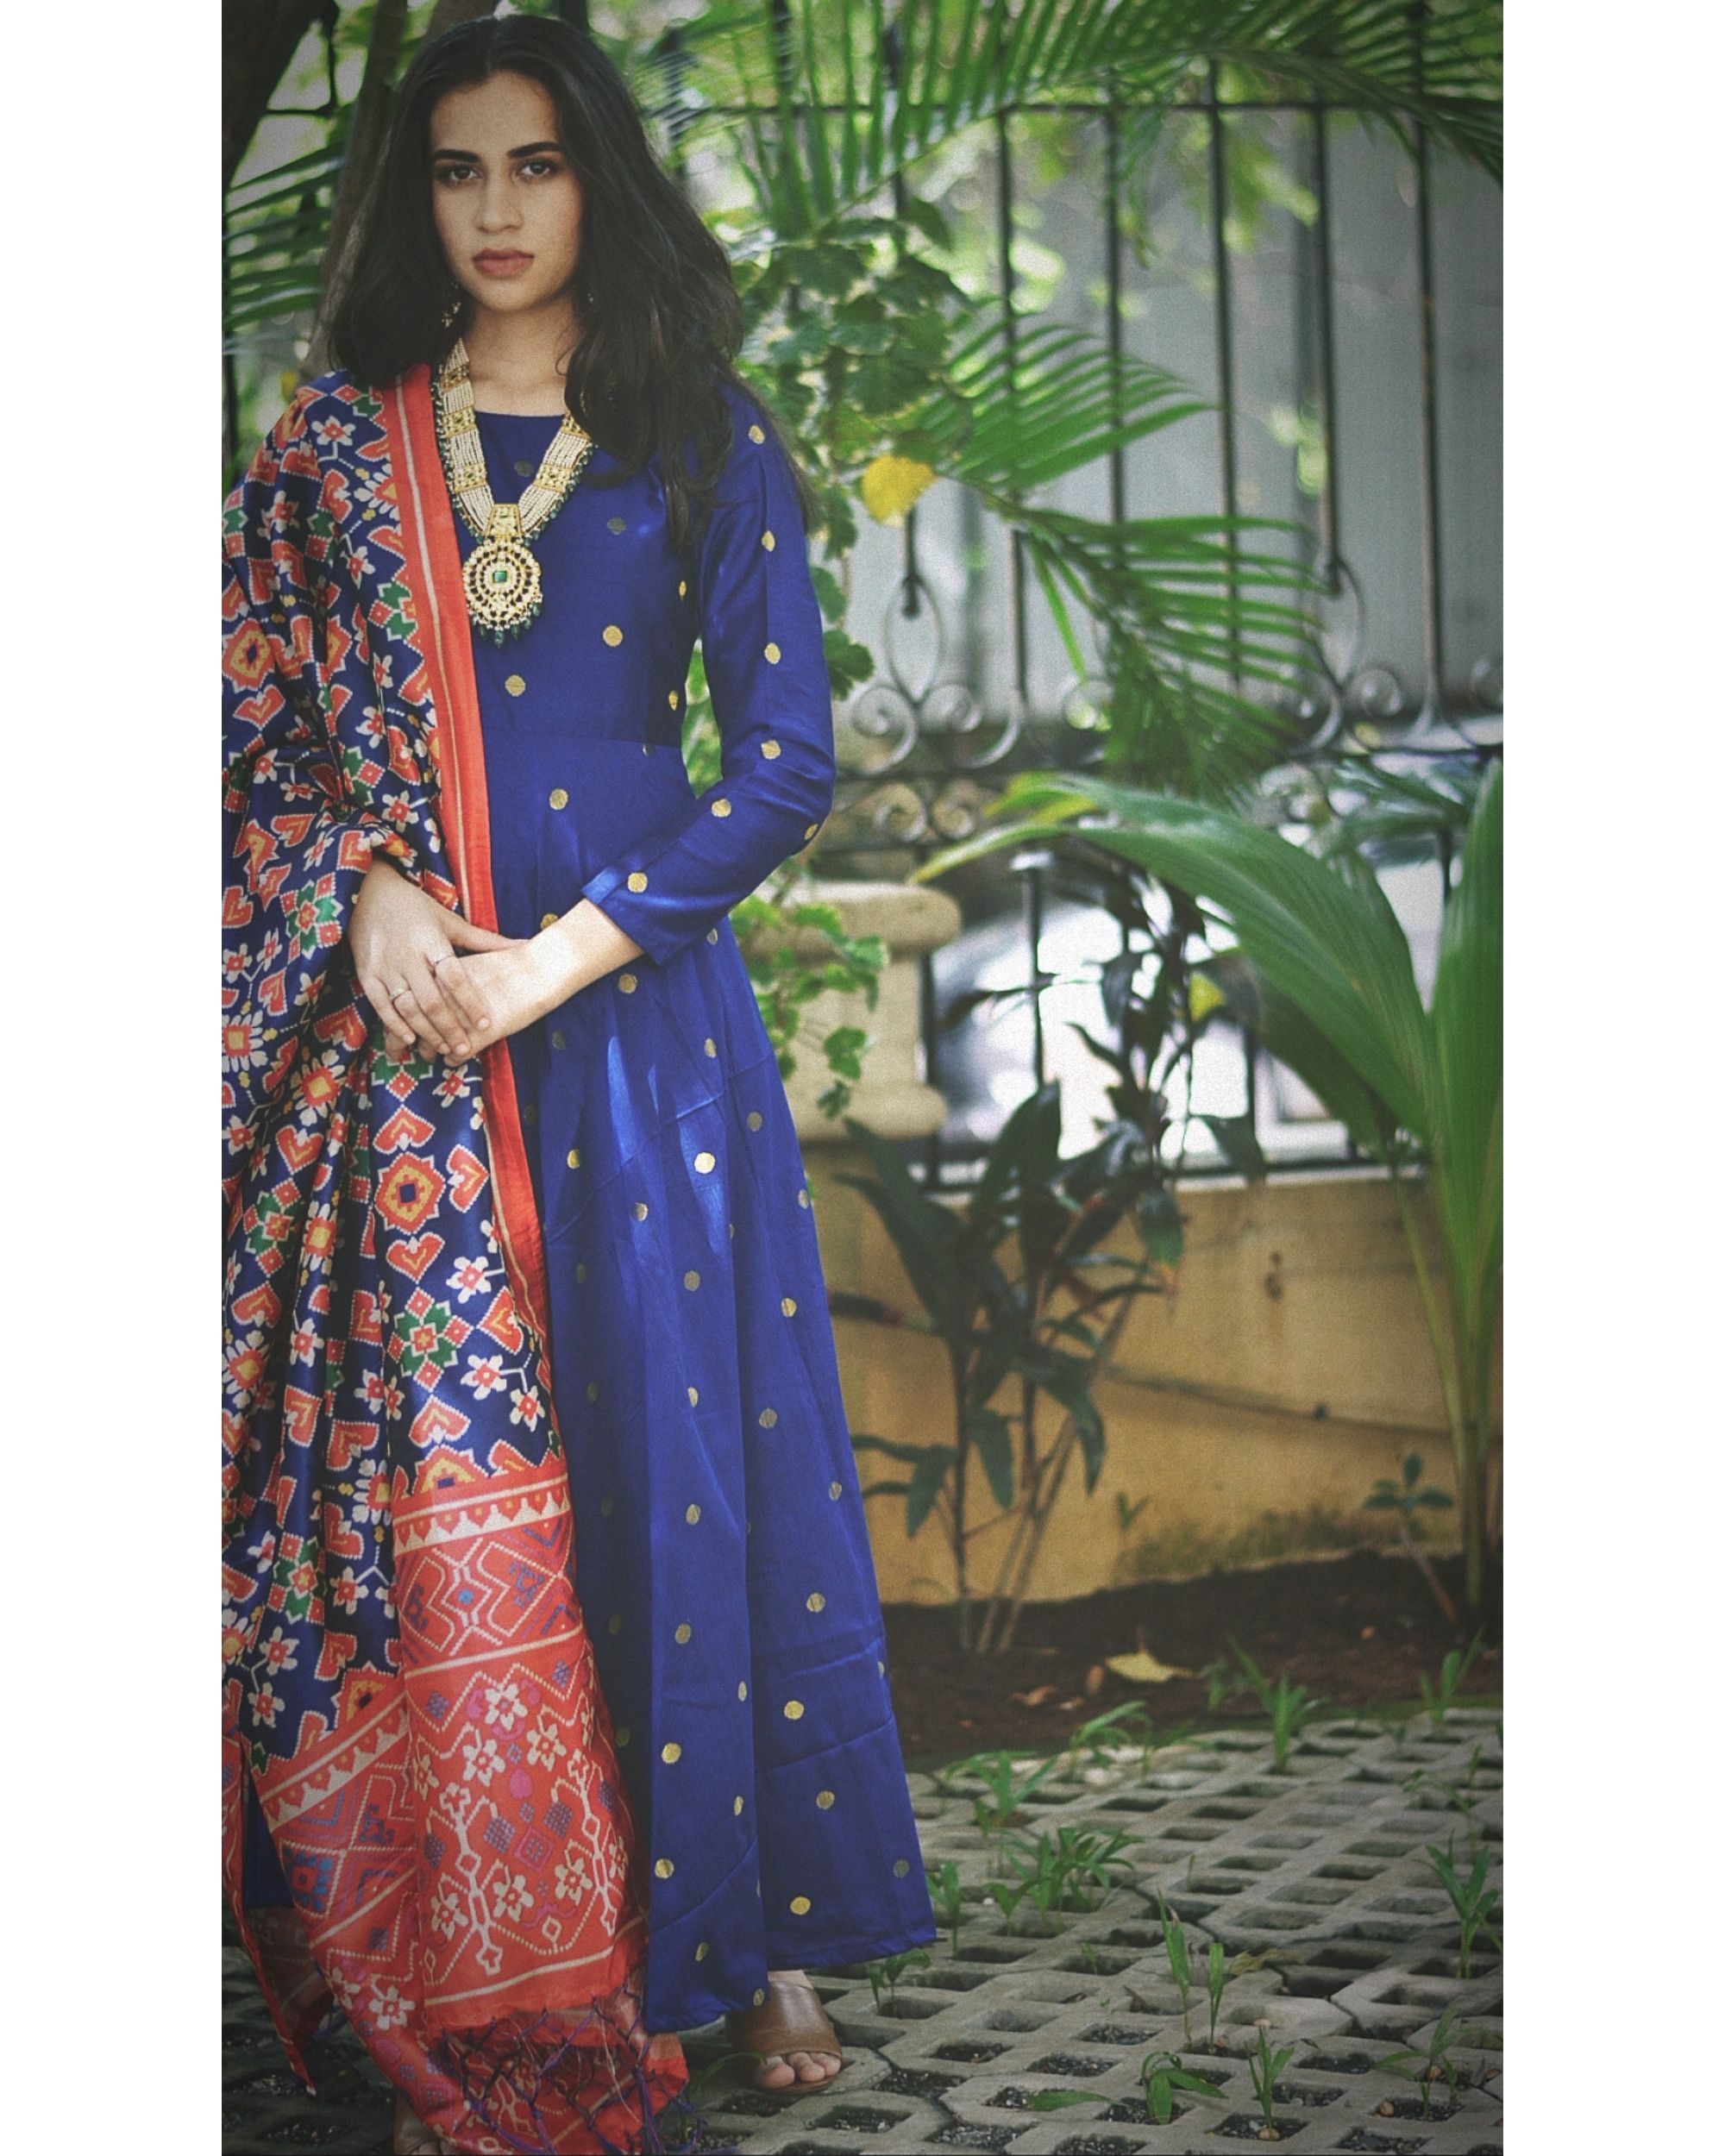 Blue root dress with printed dupatta - set of two